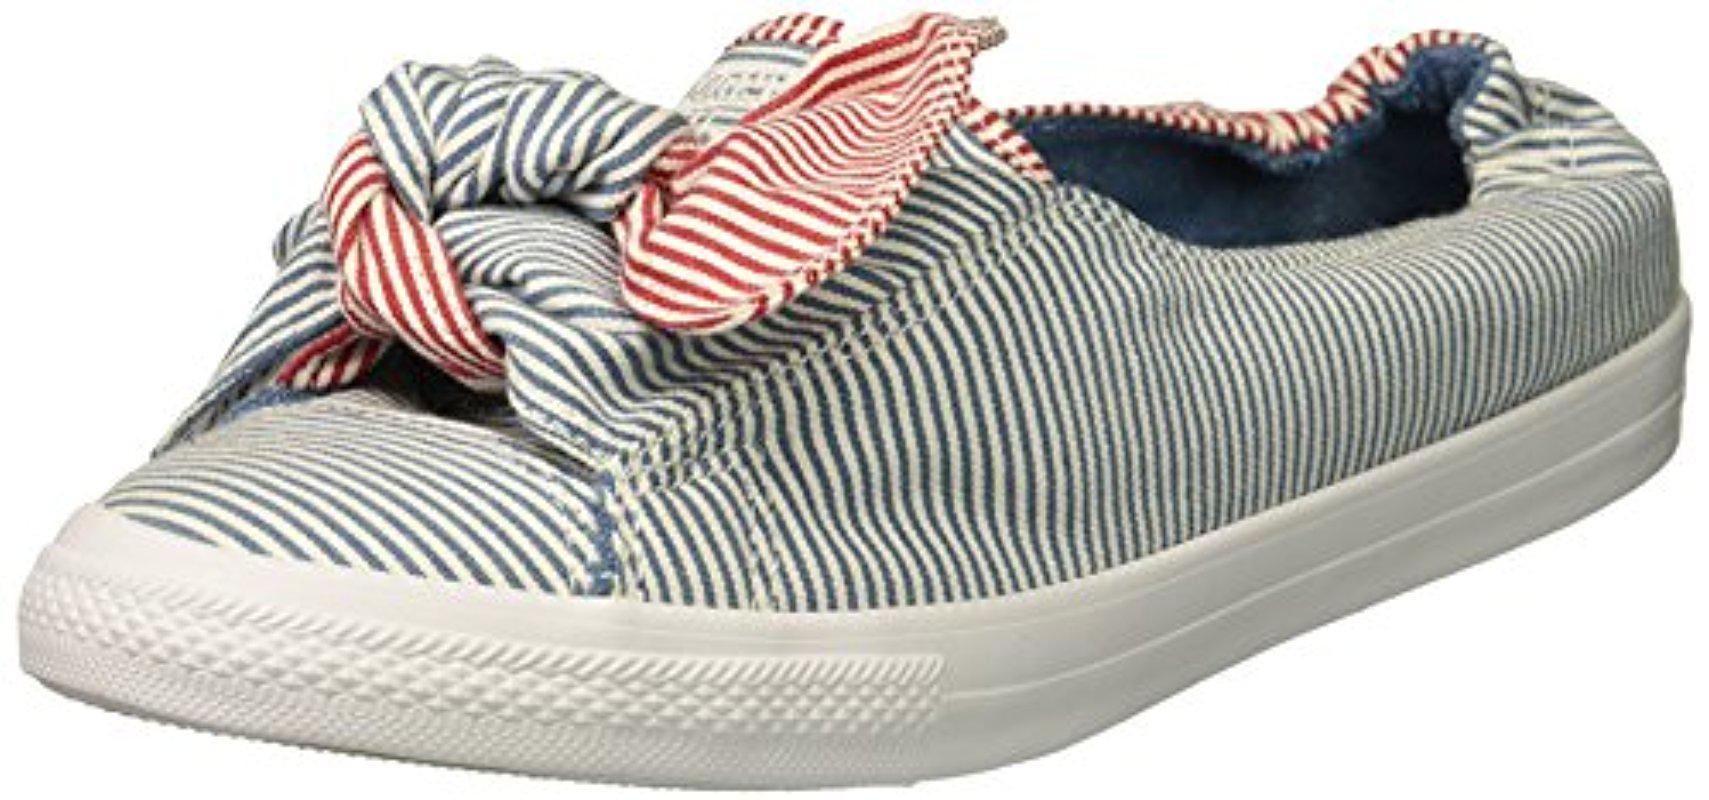 Converse Knot Striped Chambray Slip On 